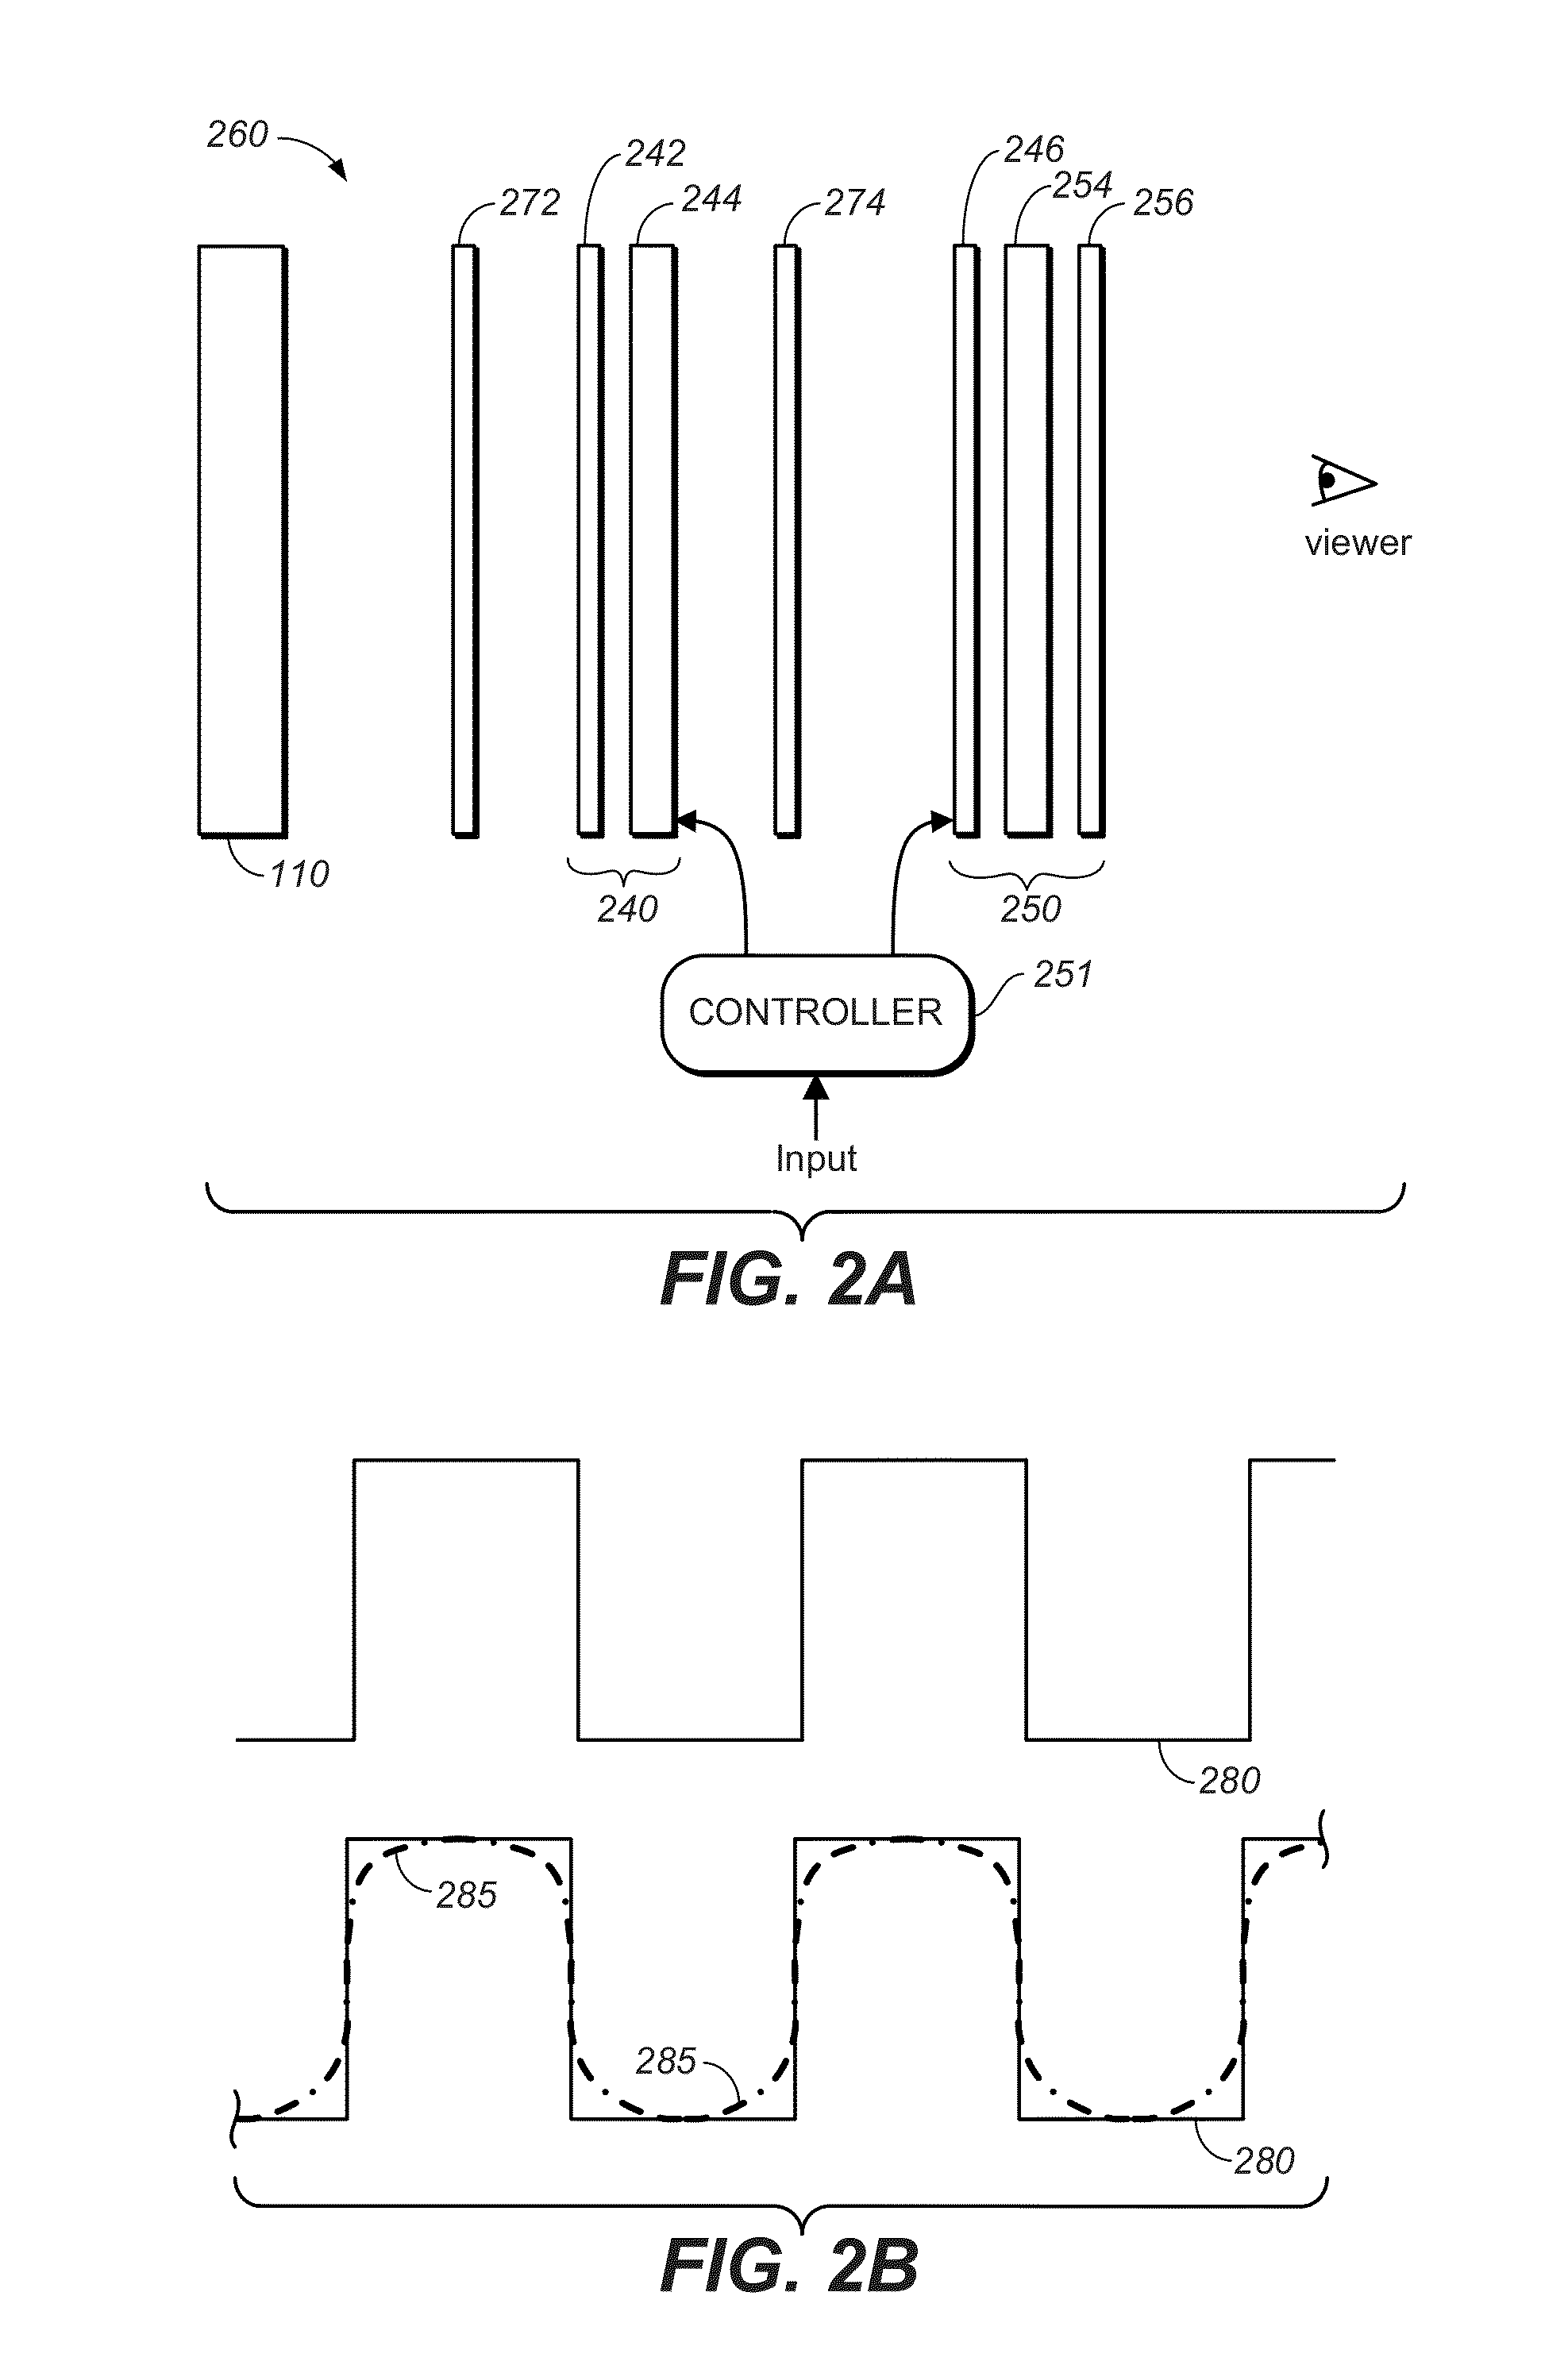 Systems and Methods for Accurately Representing High Contrast Imagery on High Dynamic Range Display Systems